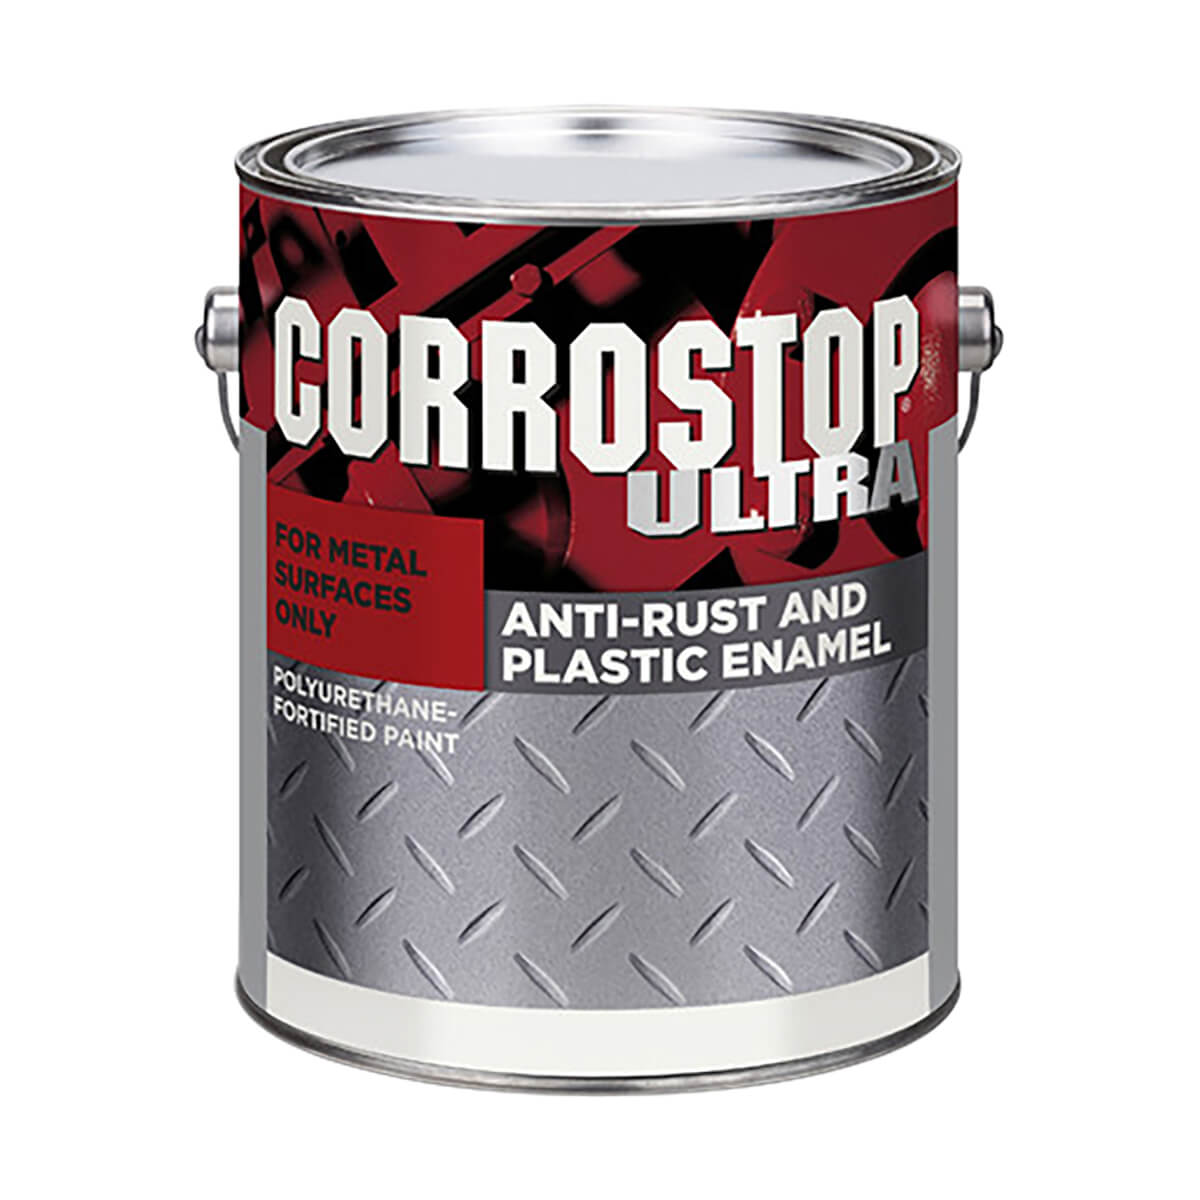 Corrostop - Anti-rust Alkyd Paint - Harvester Red - 3.78 L